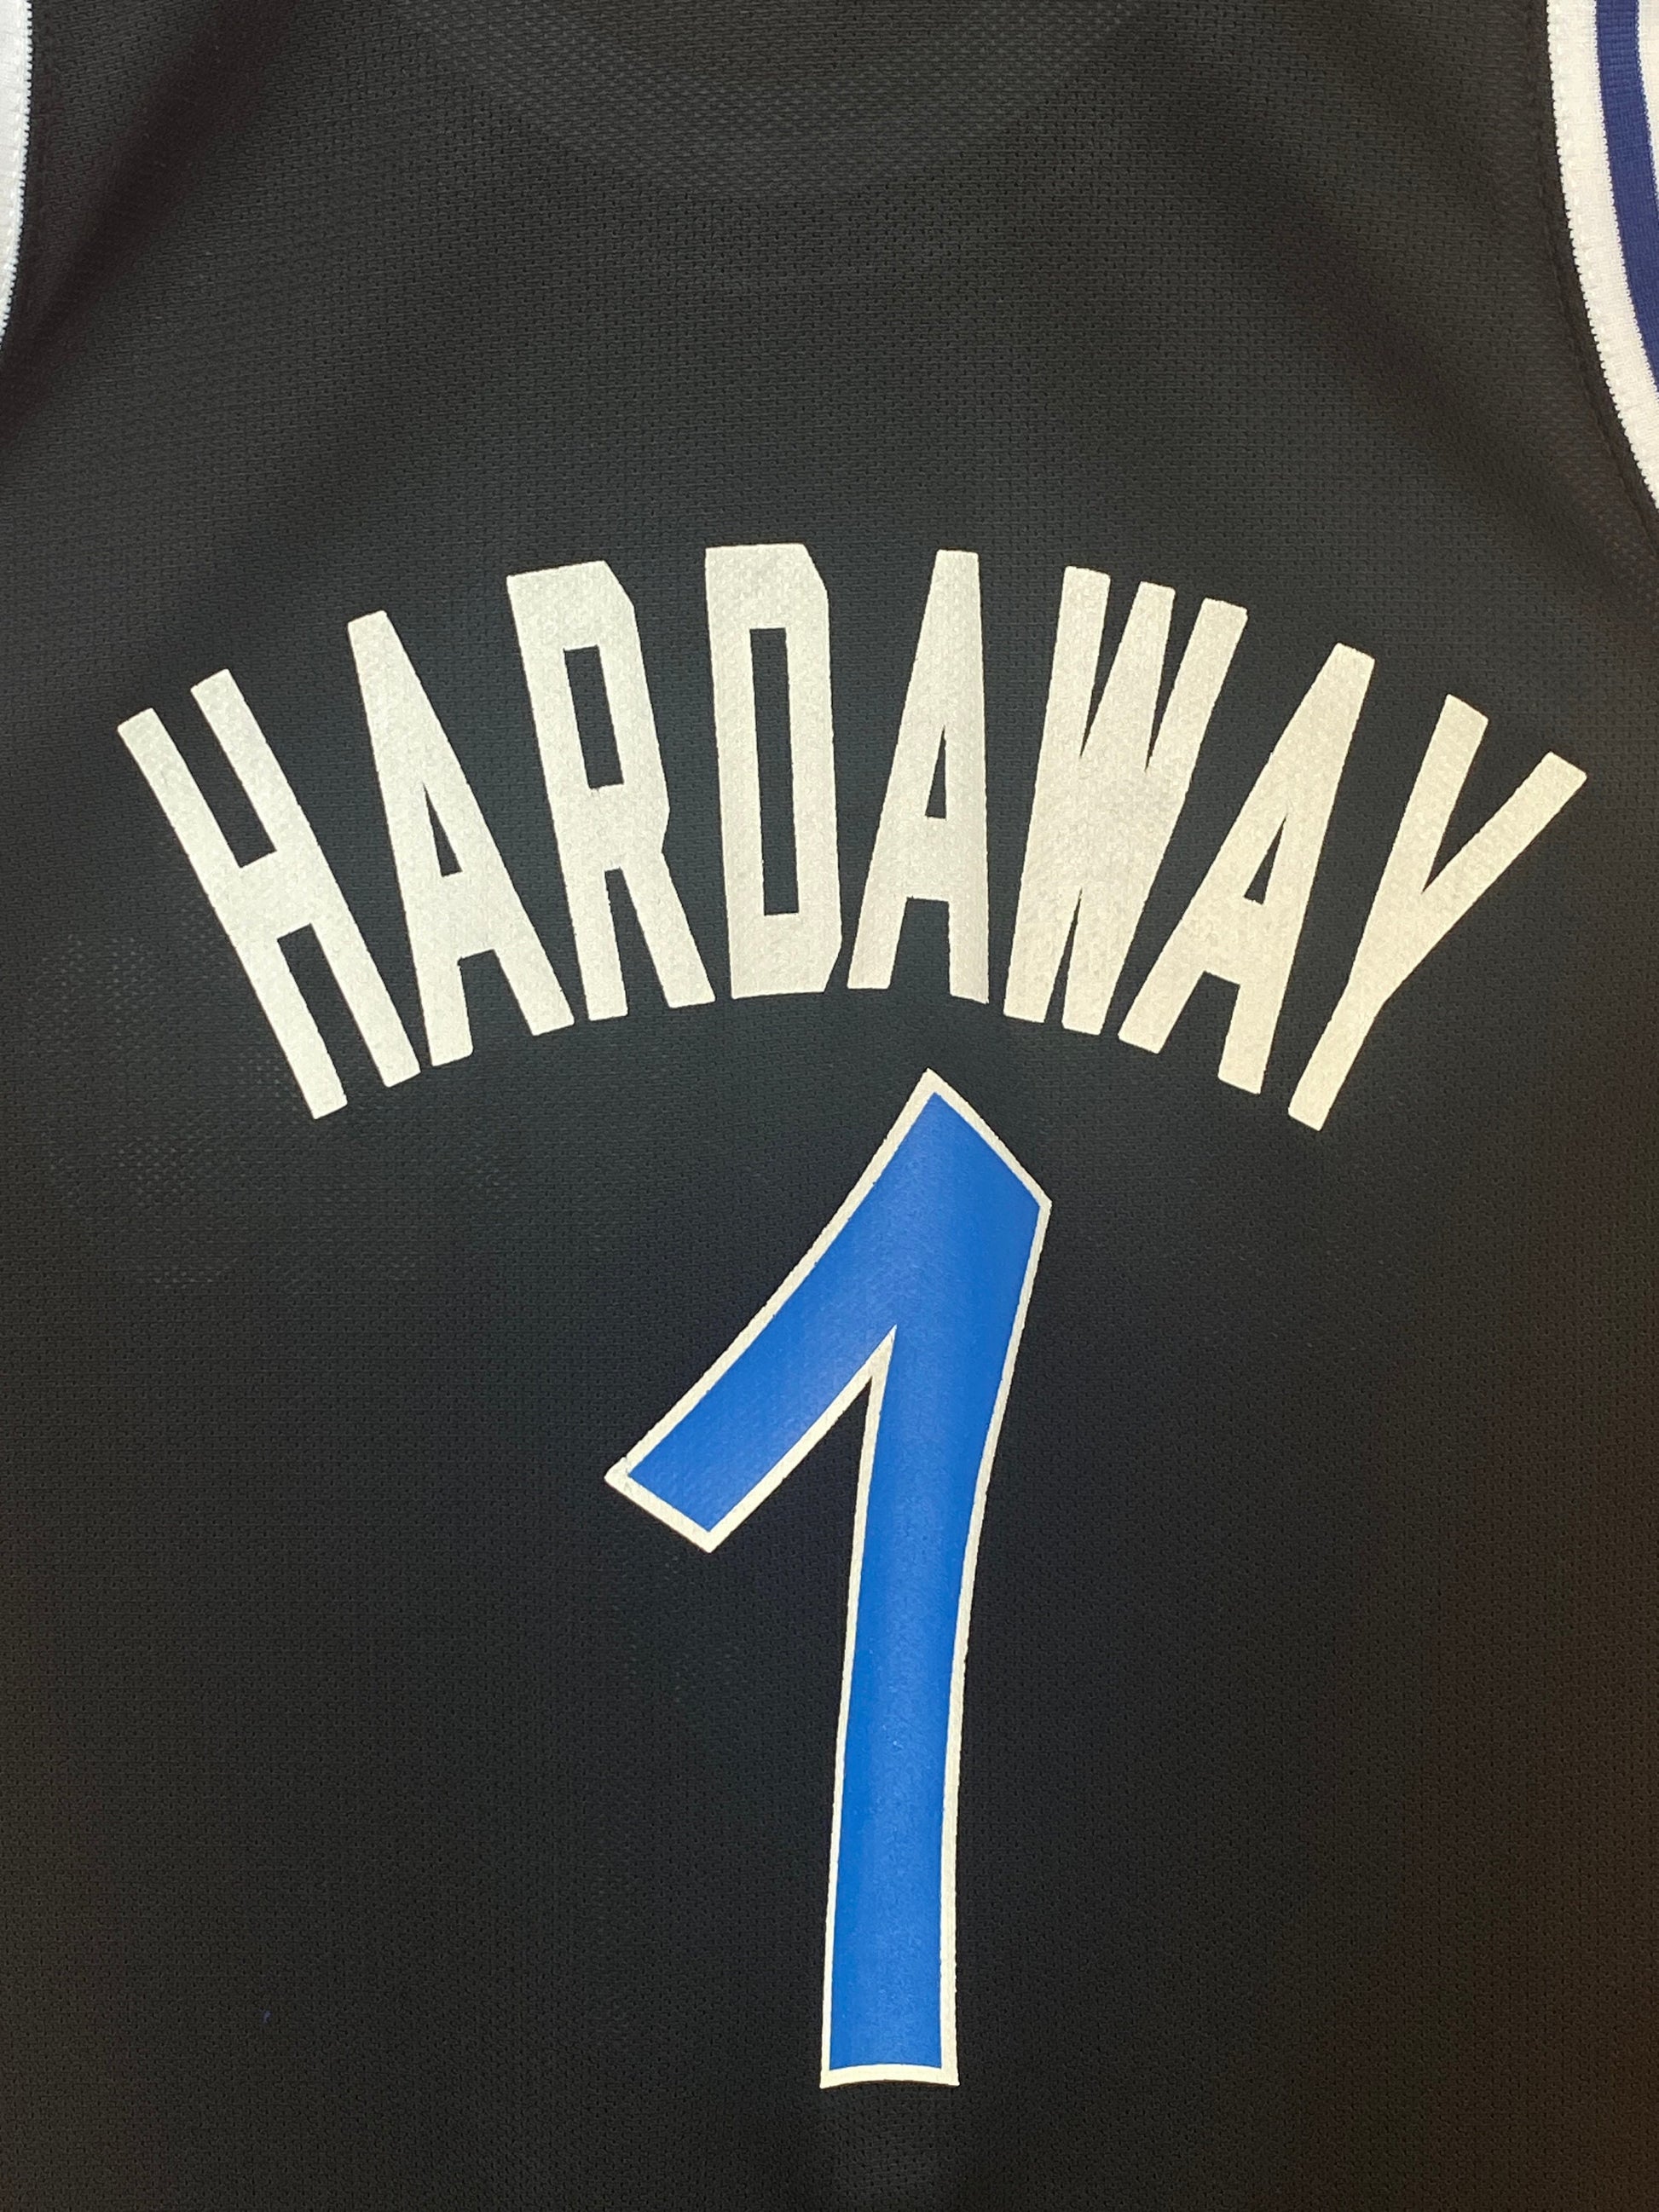 Vintage 90s Orlando Champion NBA jersey with player Hardaway #01, size 48 - BACK view.